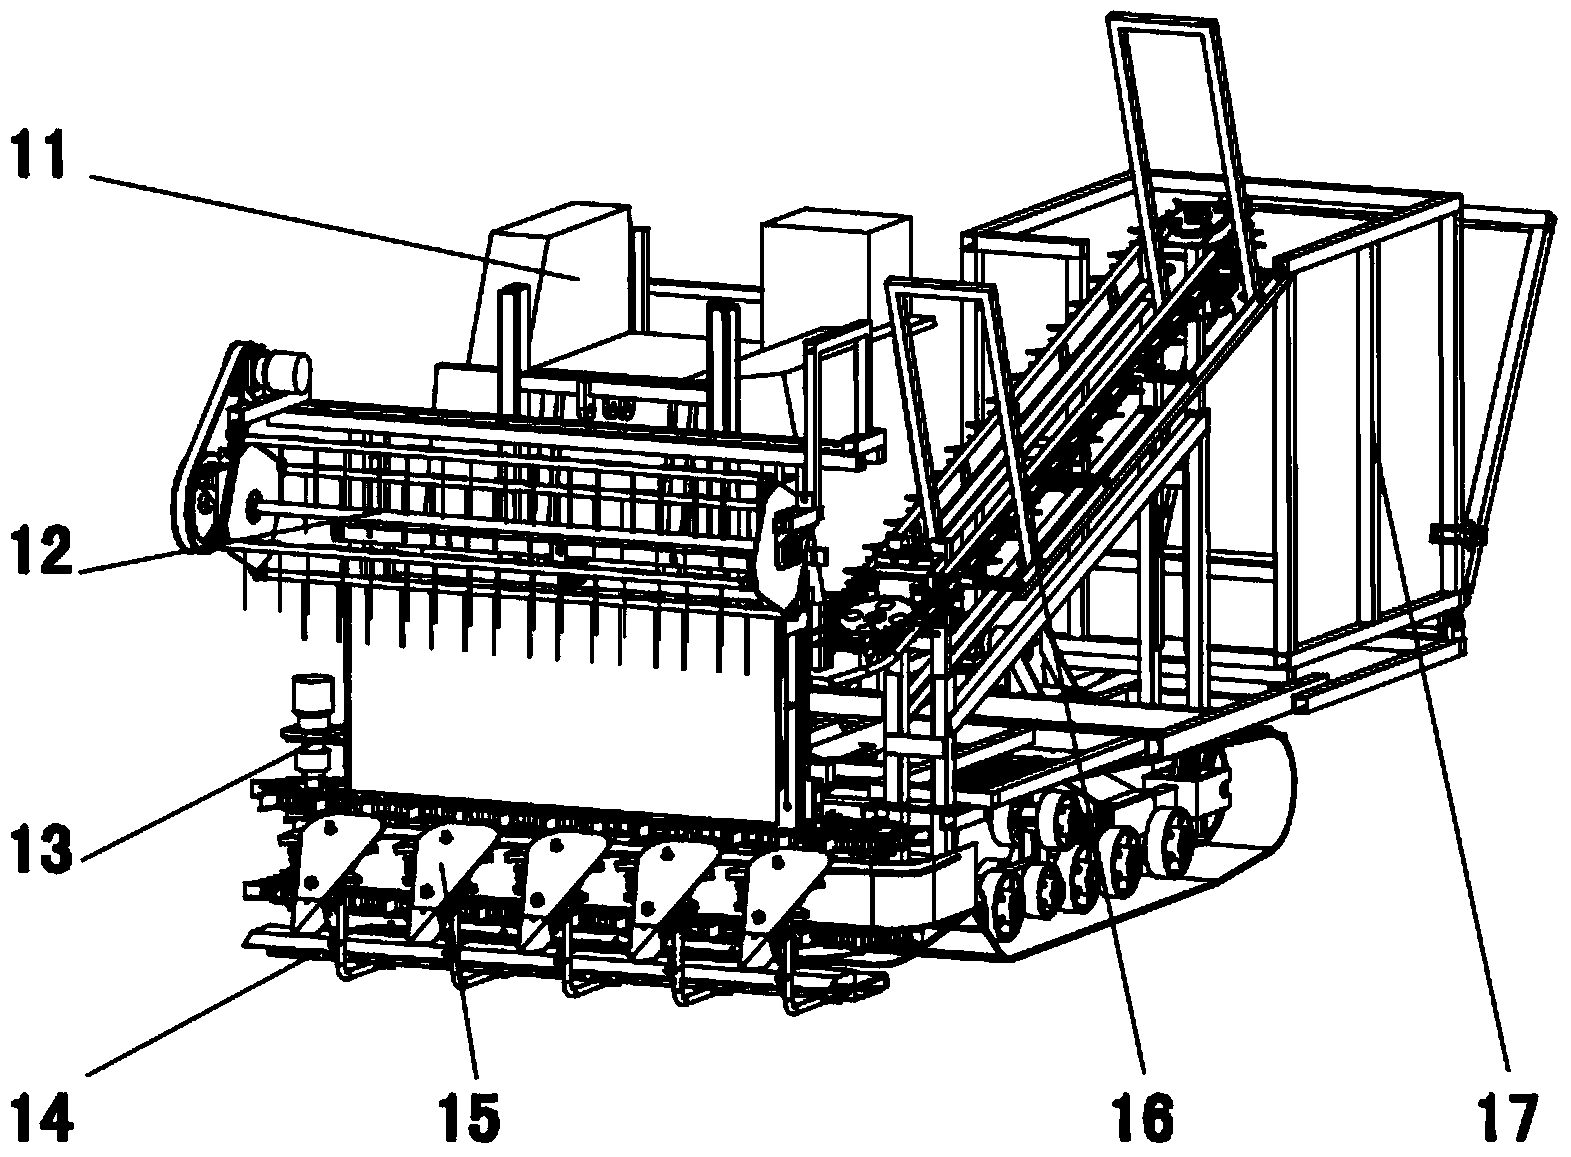 High and thick-stalk crop harvester